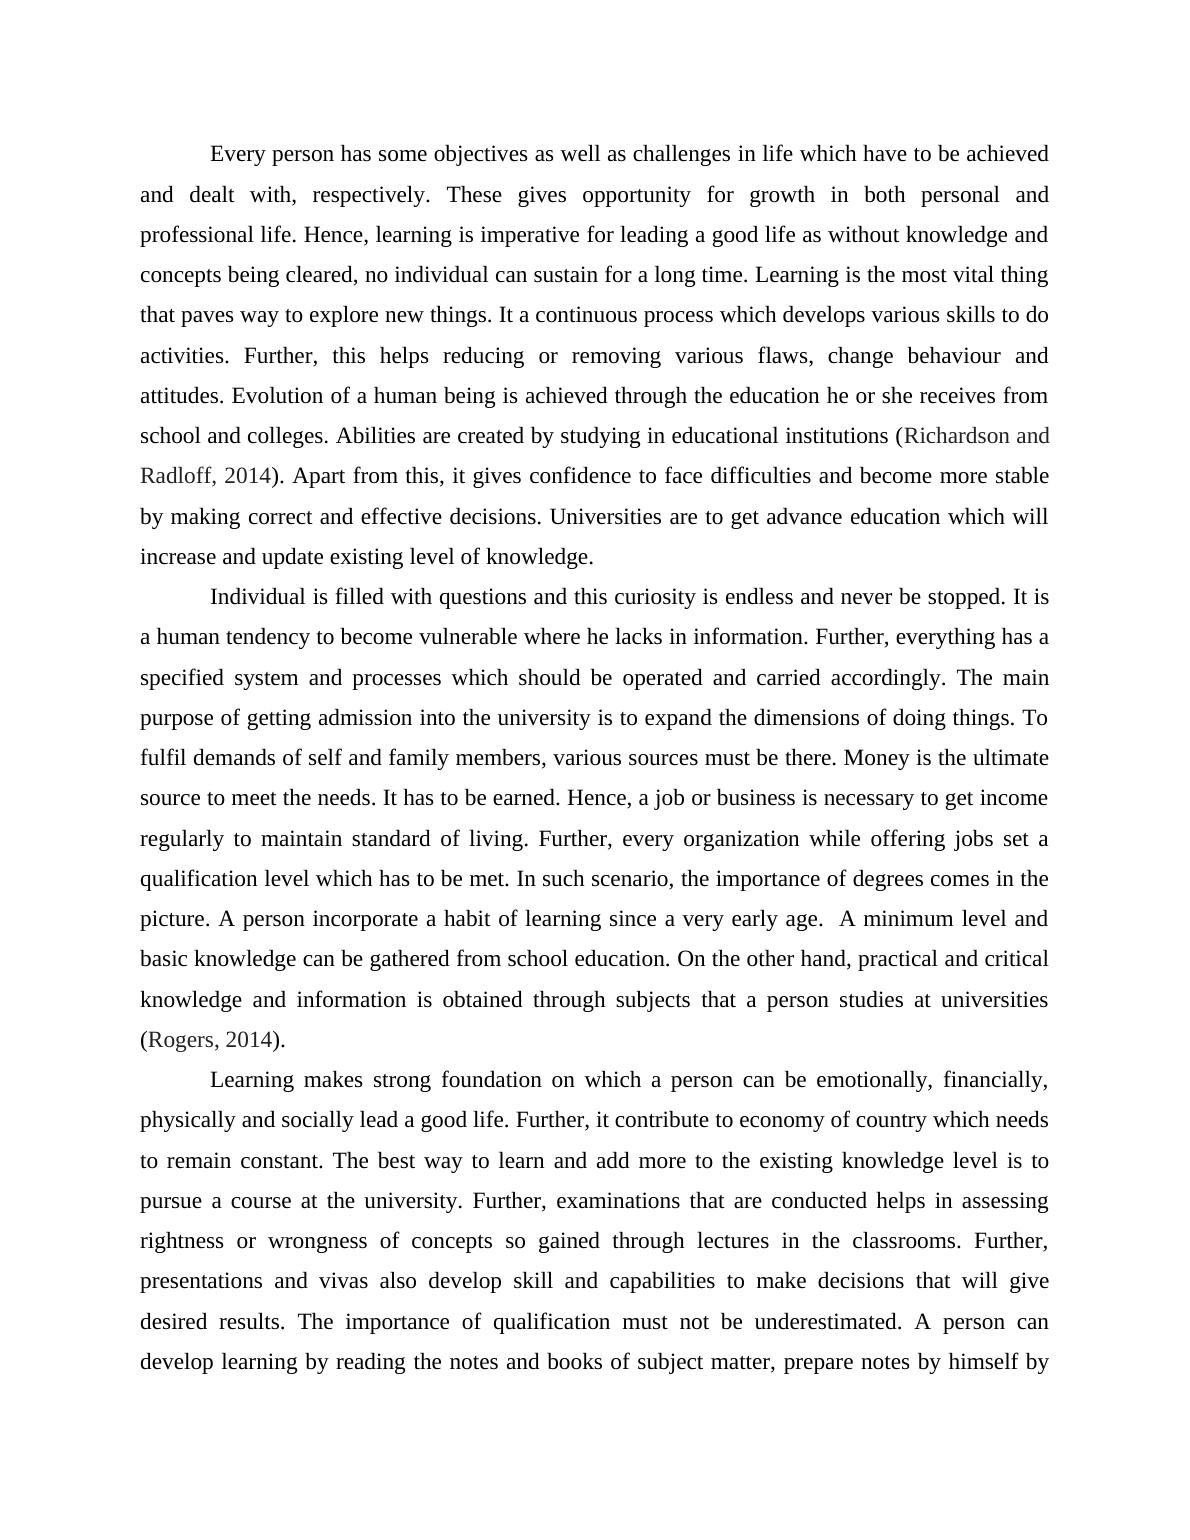 Personal and Professional Life: Essay_2